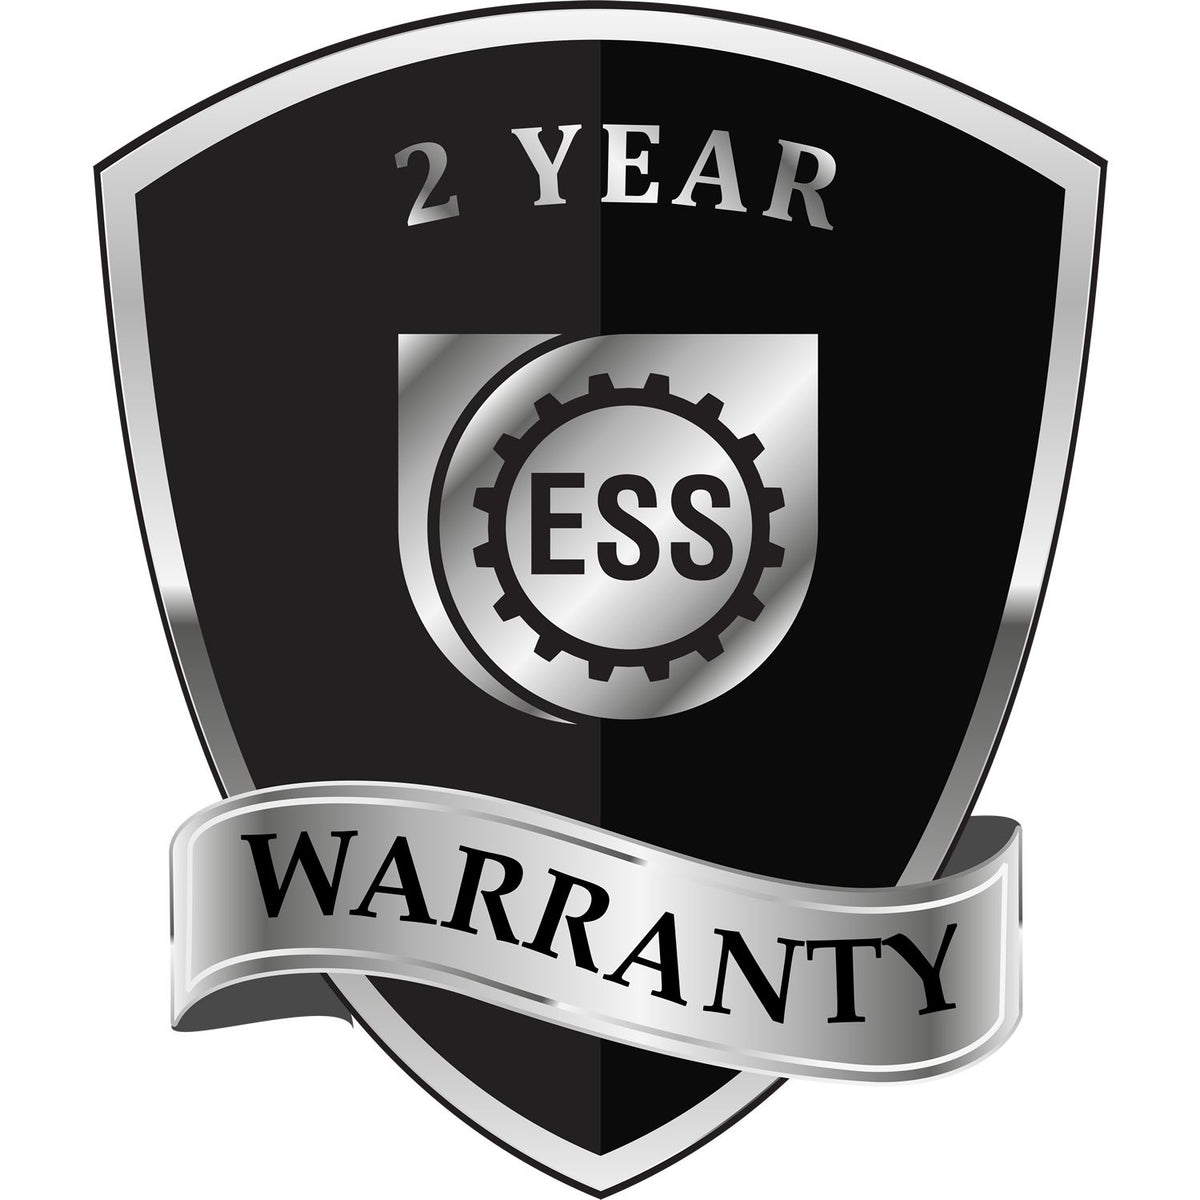 A badge or emblem showing a warranty icon for the Heavy Duty Cast Iron South Dakota Engineer Seal Embosser